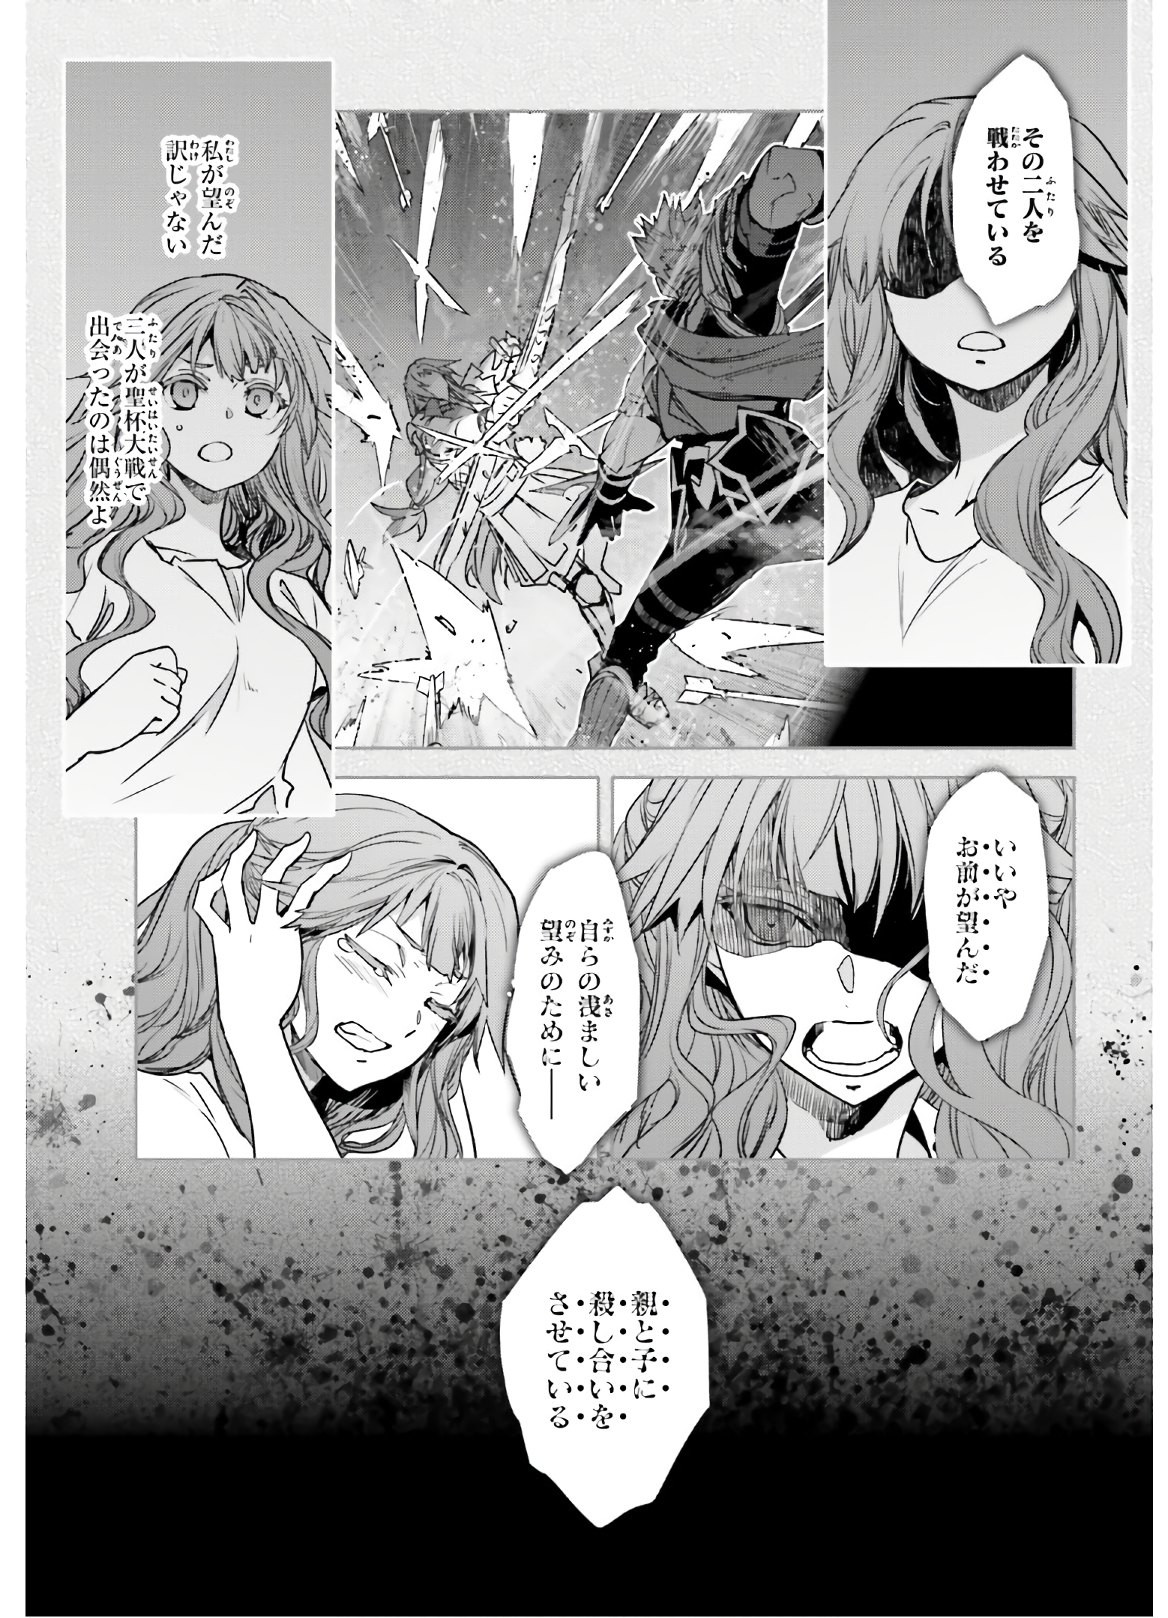 Fate-Apocrypha - Chapter 41 - Page 19